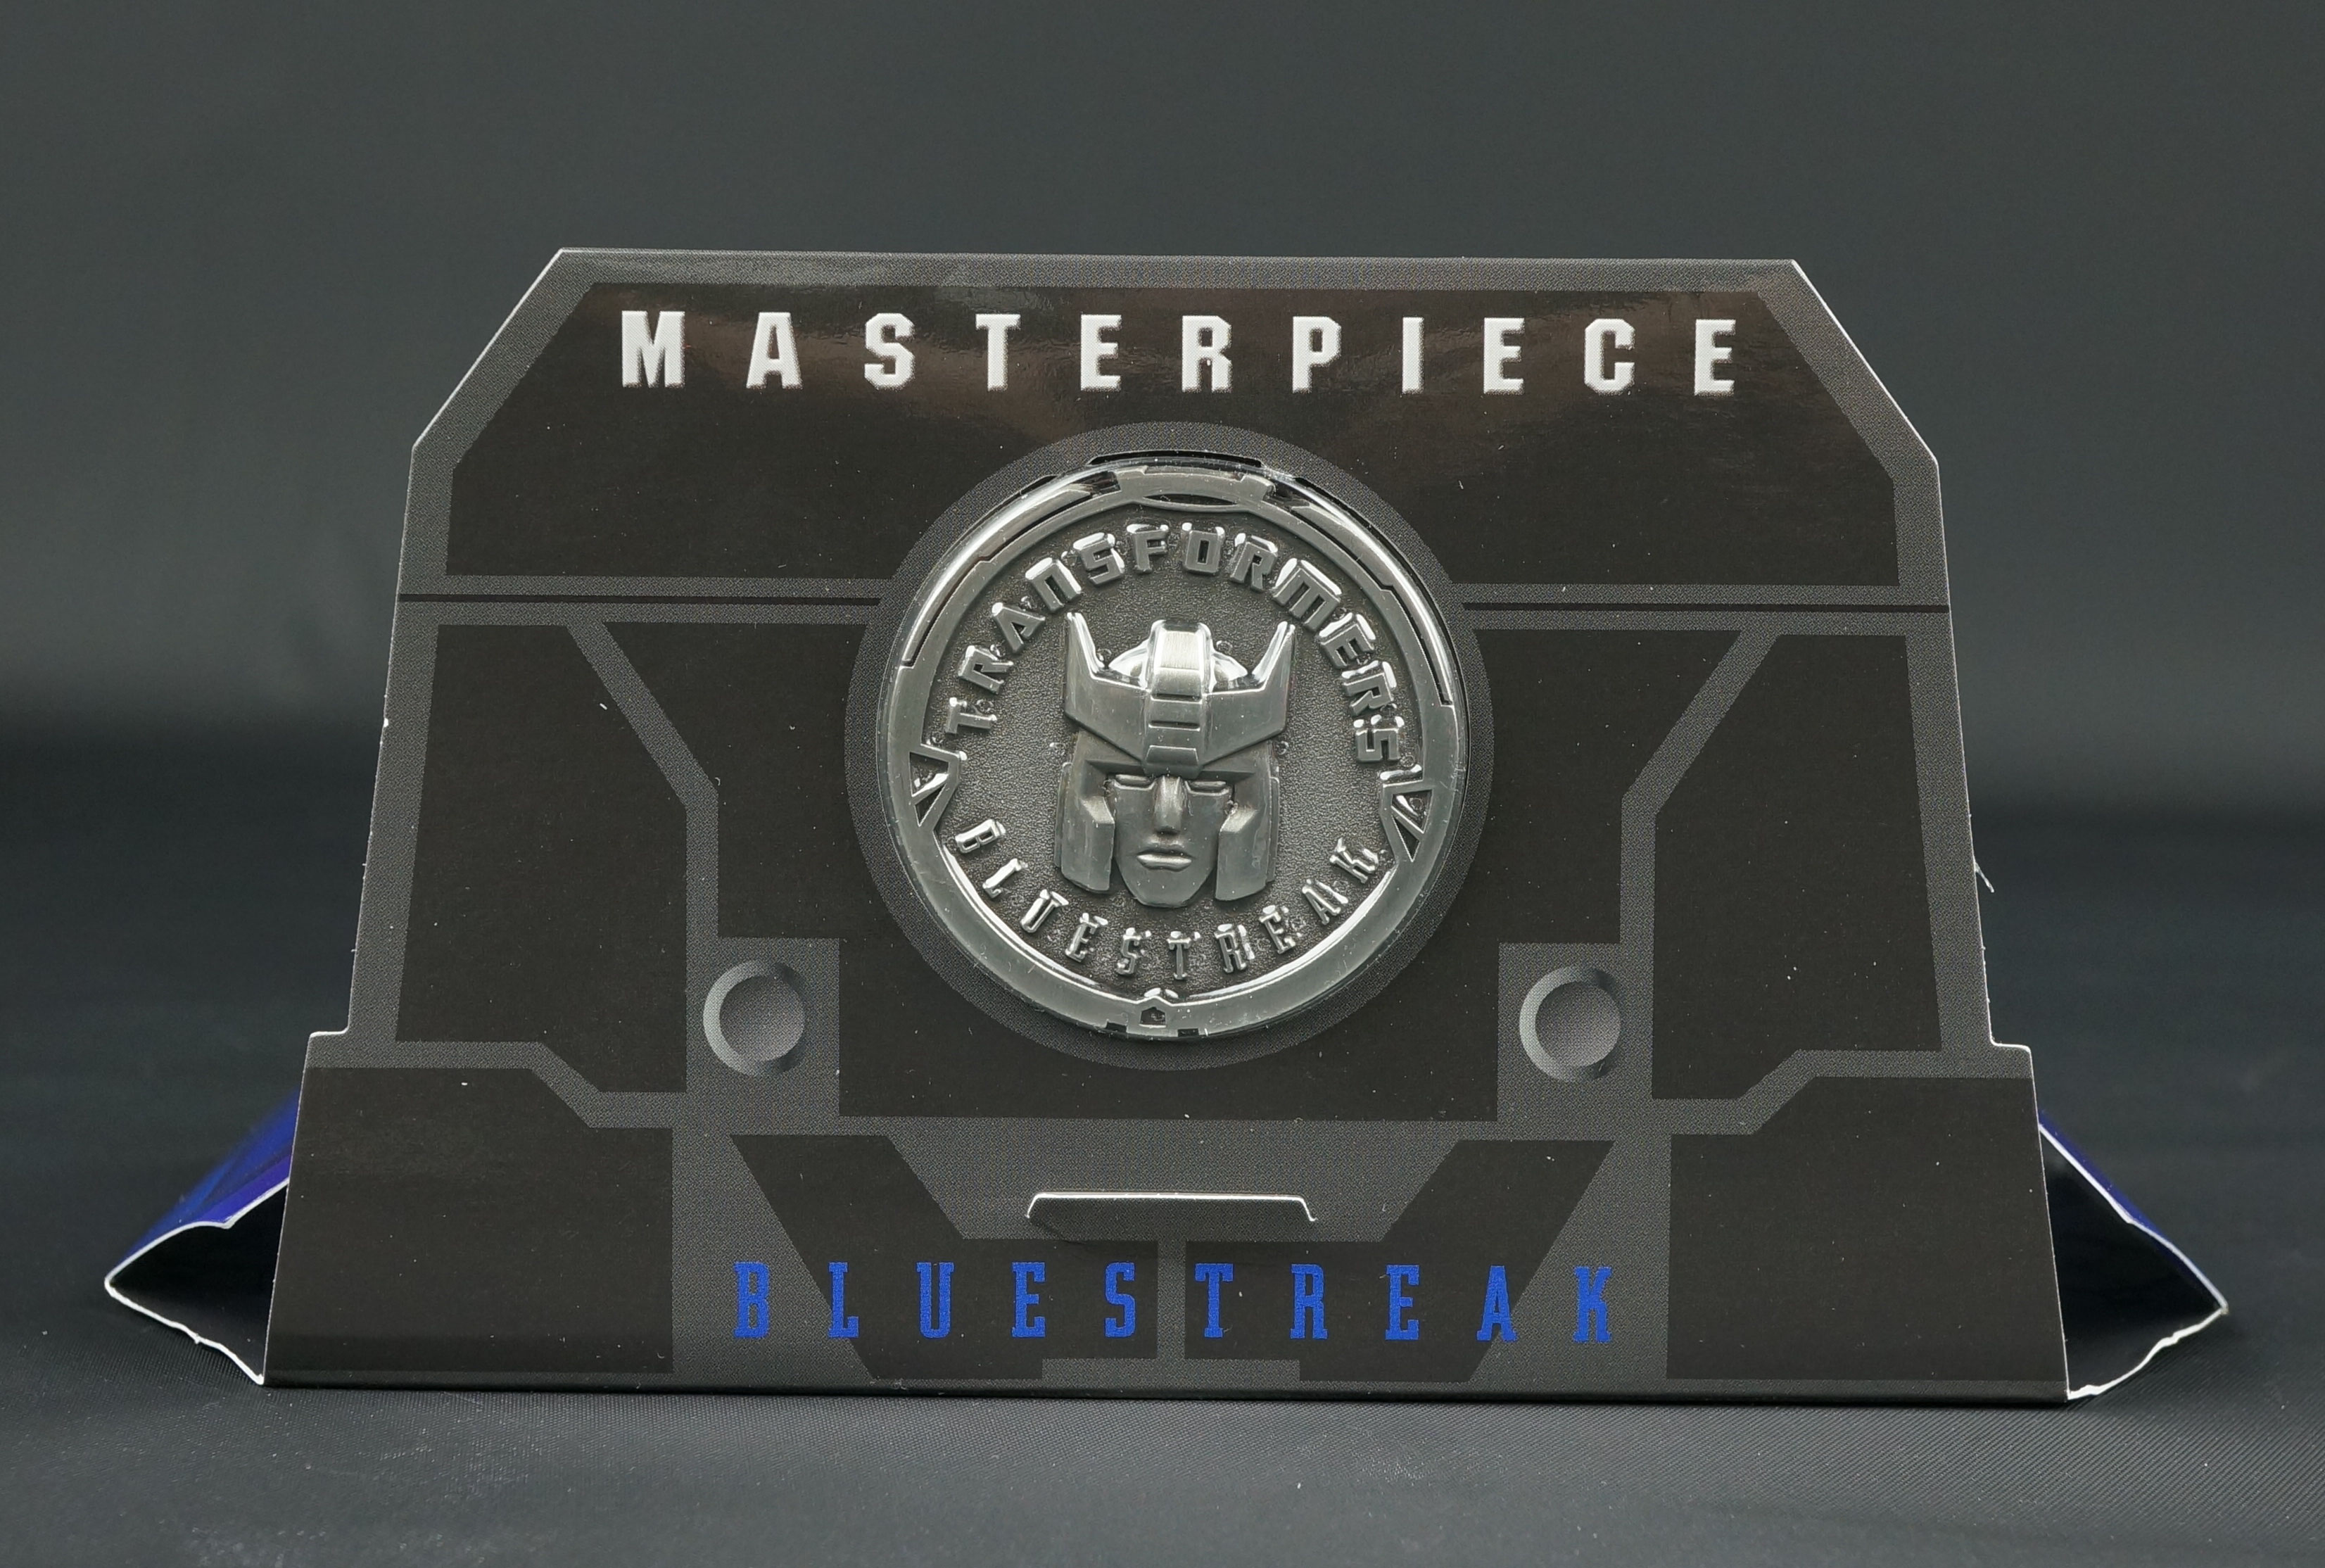 Transformers, Shopkins, Masters of the Universe, Teenage Mutant Ninja Turtles, Comic Books, and other listings from Seibertron.com: COLLECTOR COIN for MP-18B Bluestreak Transformers Masterpiece Takara Tomy 2015